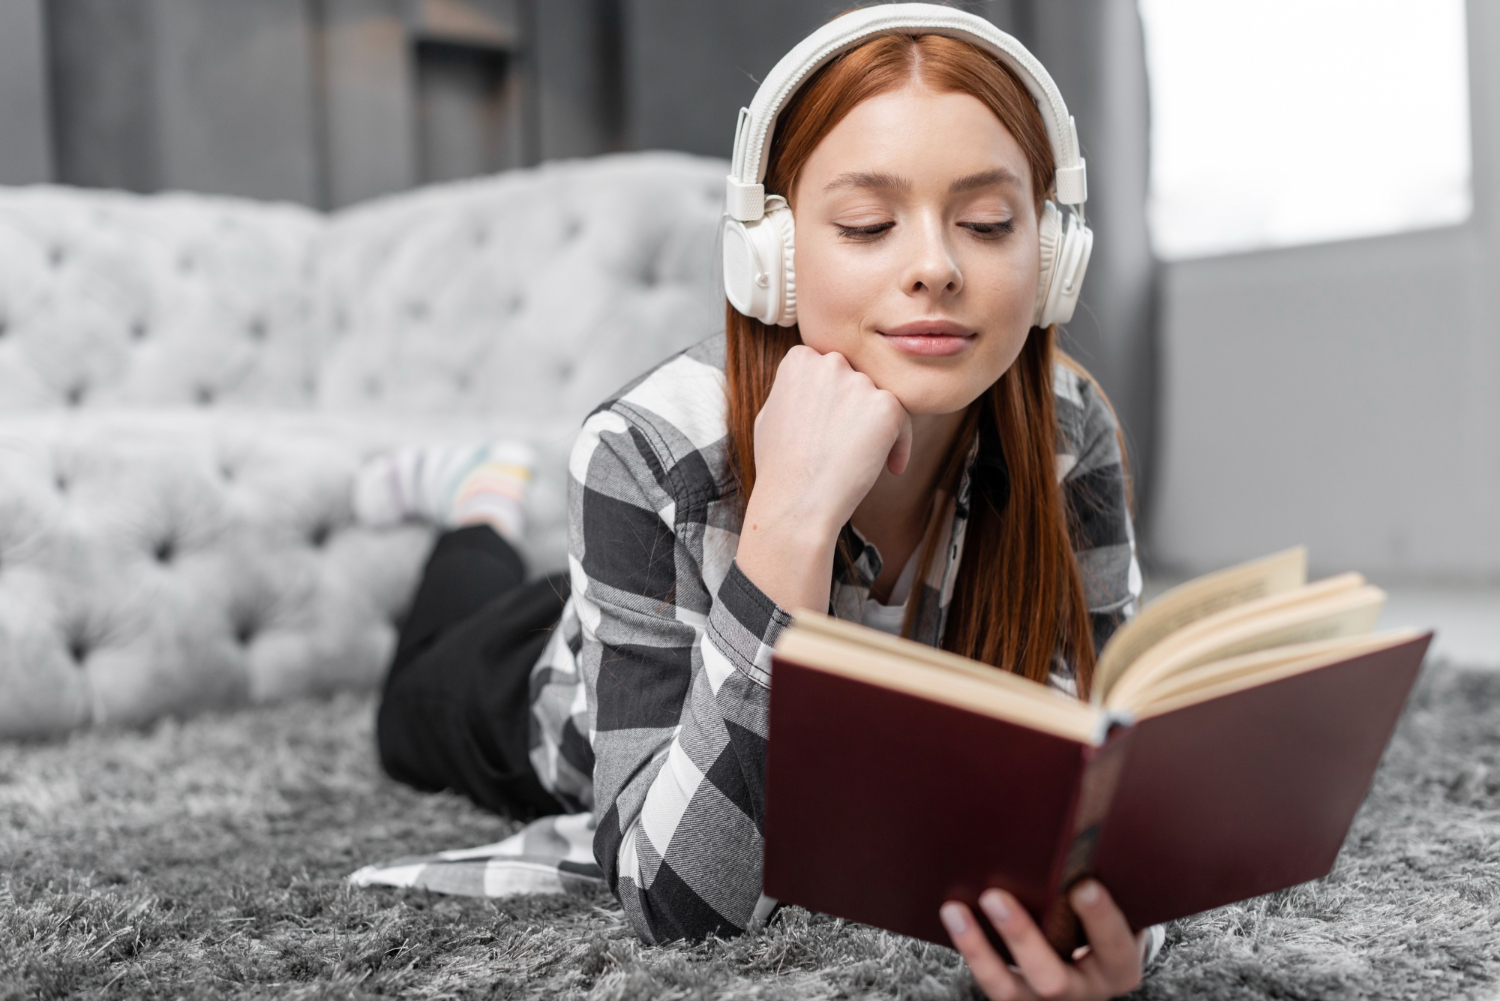 Immerse yourself in the World of Audiobooks: Professional dubbing, recording and distribution of your work!